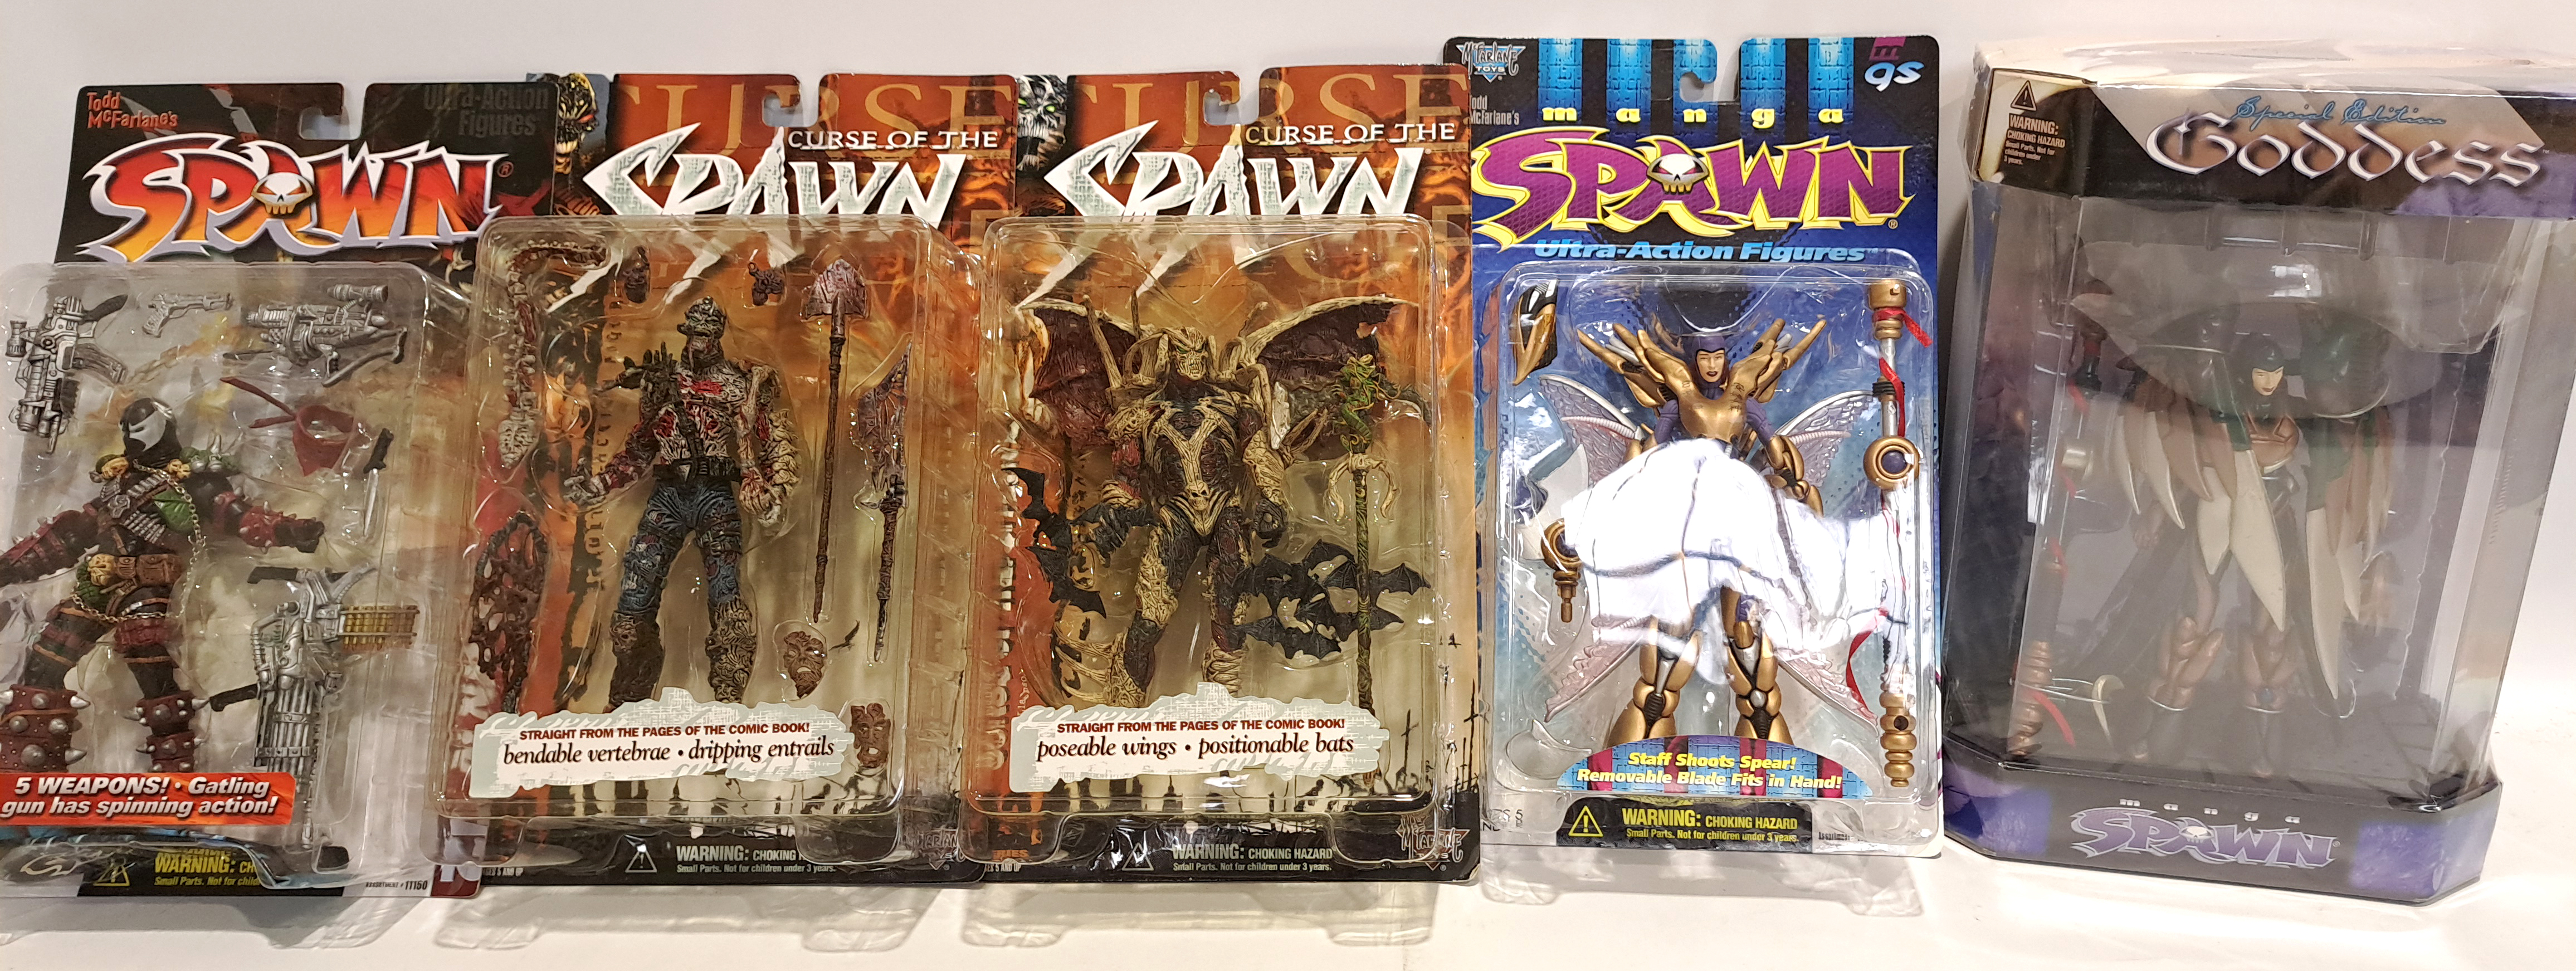 Mcfarlane Toys Spawn Carded/Boxed Figures